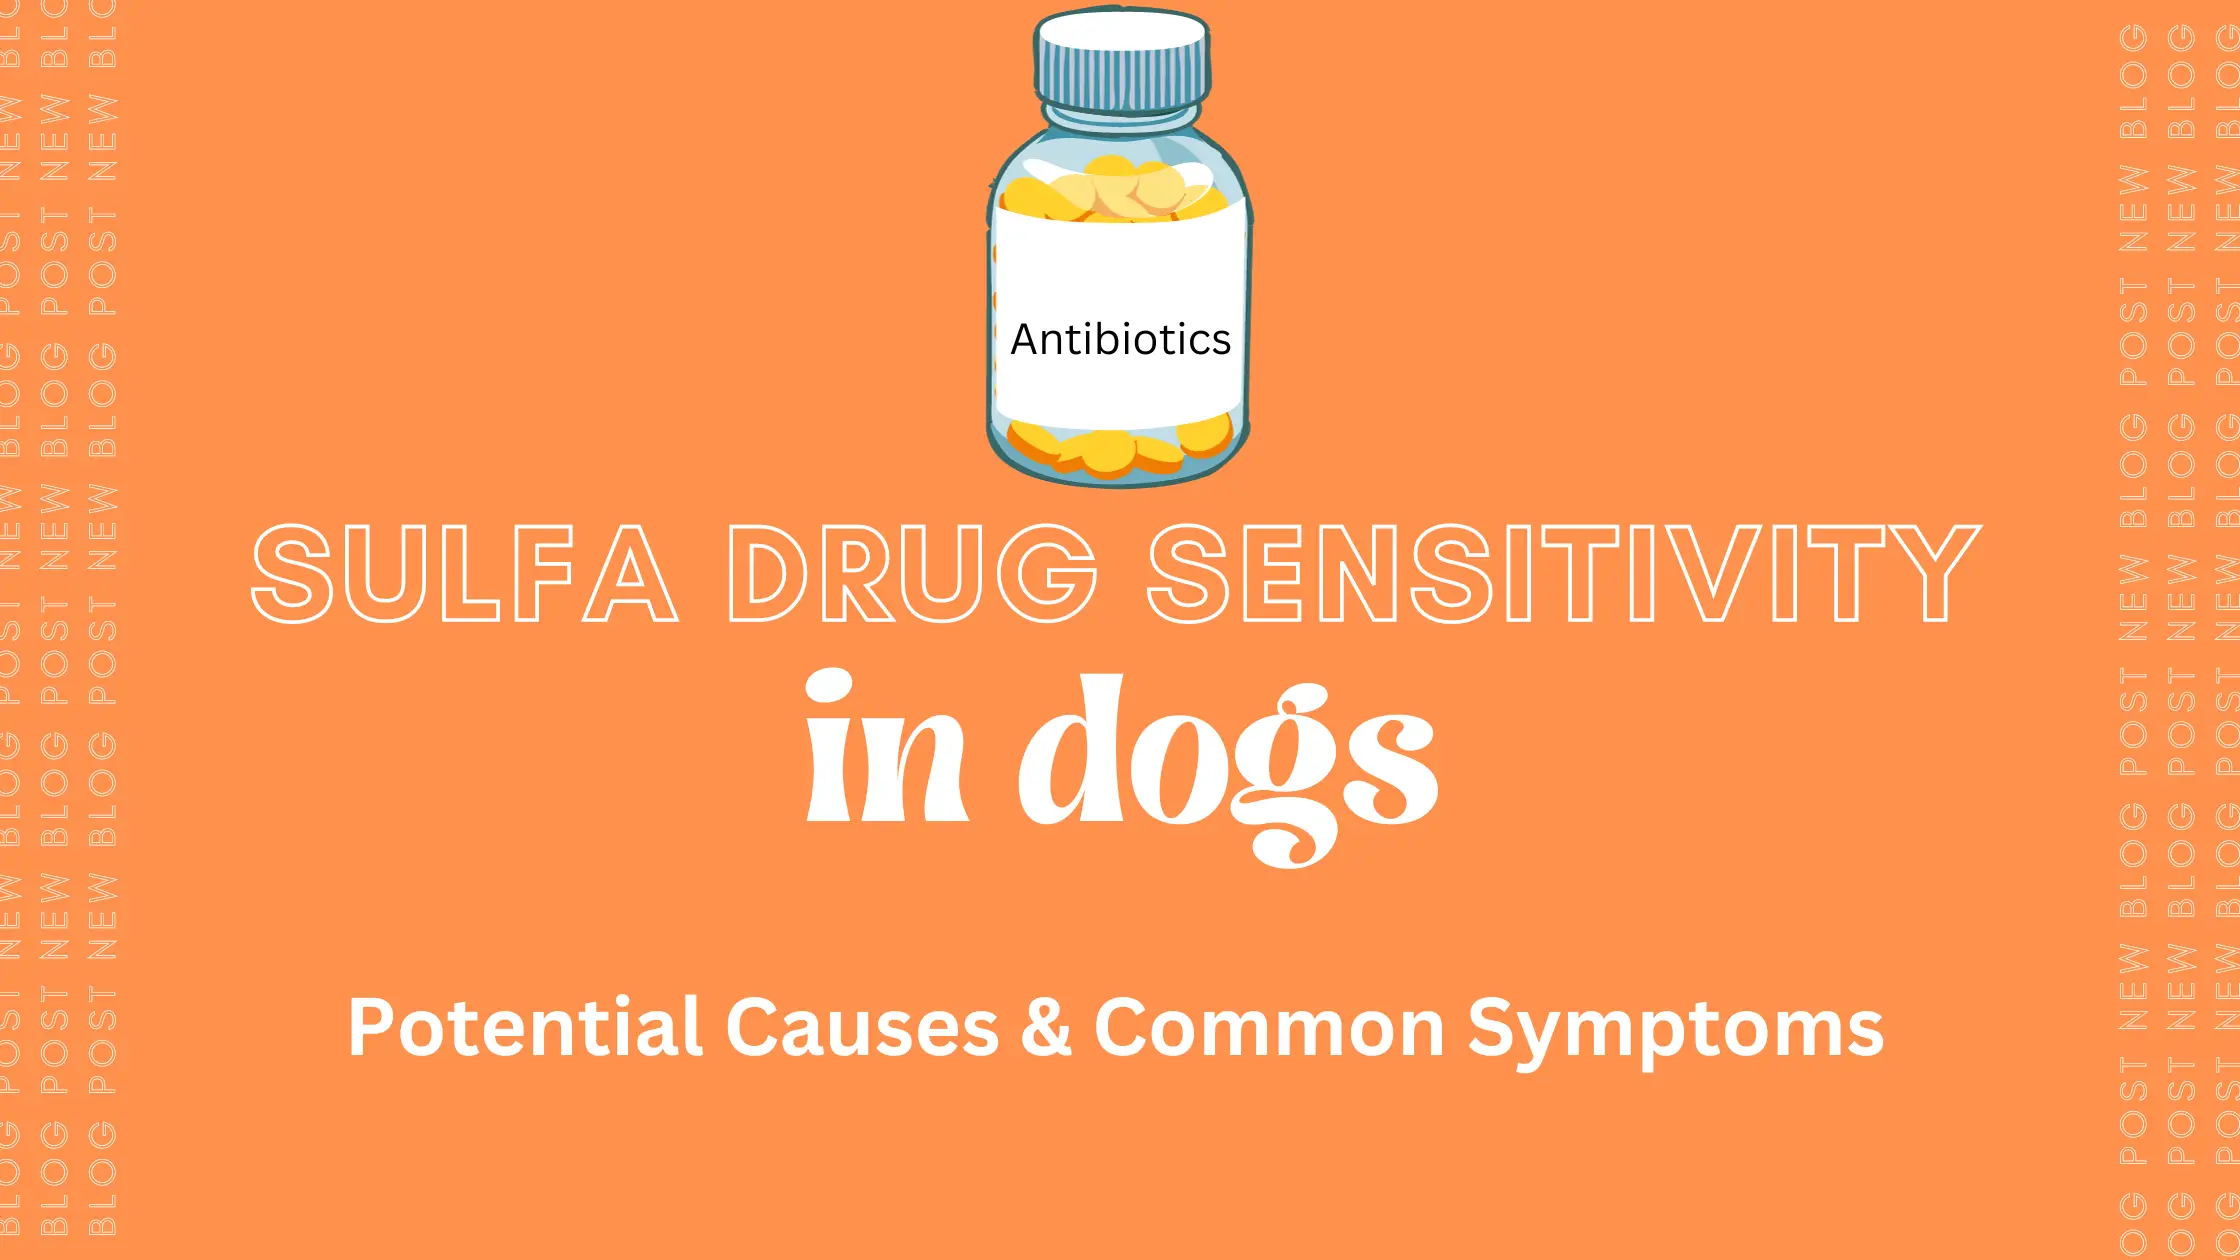 sulfa drug sensitivity in dogs causes and symptoms